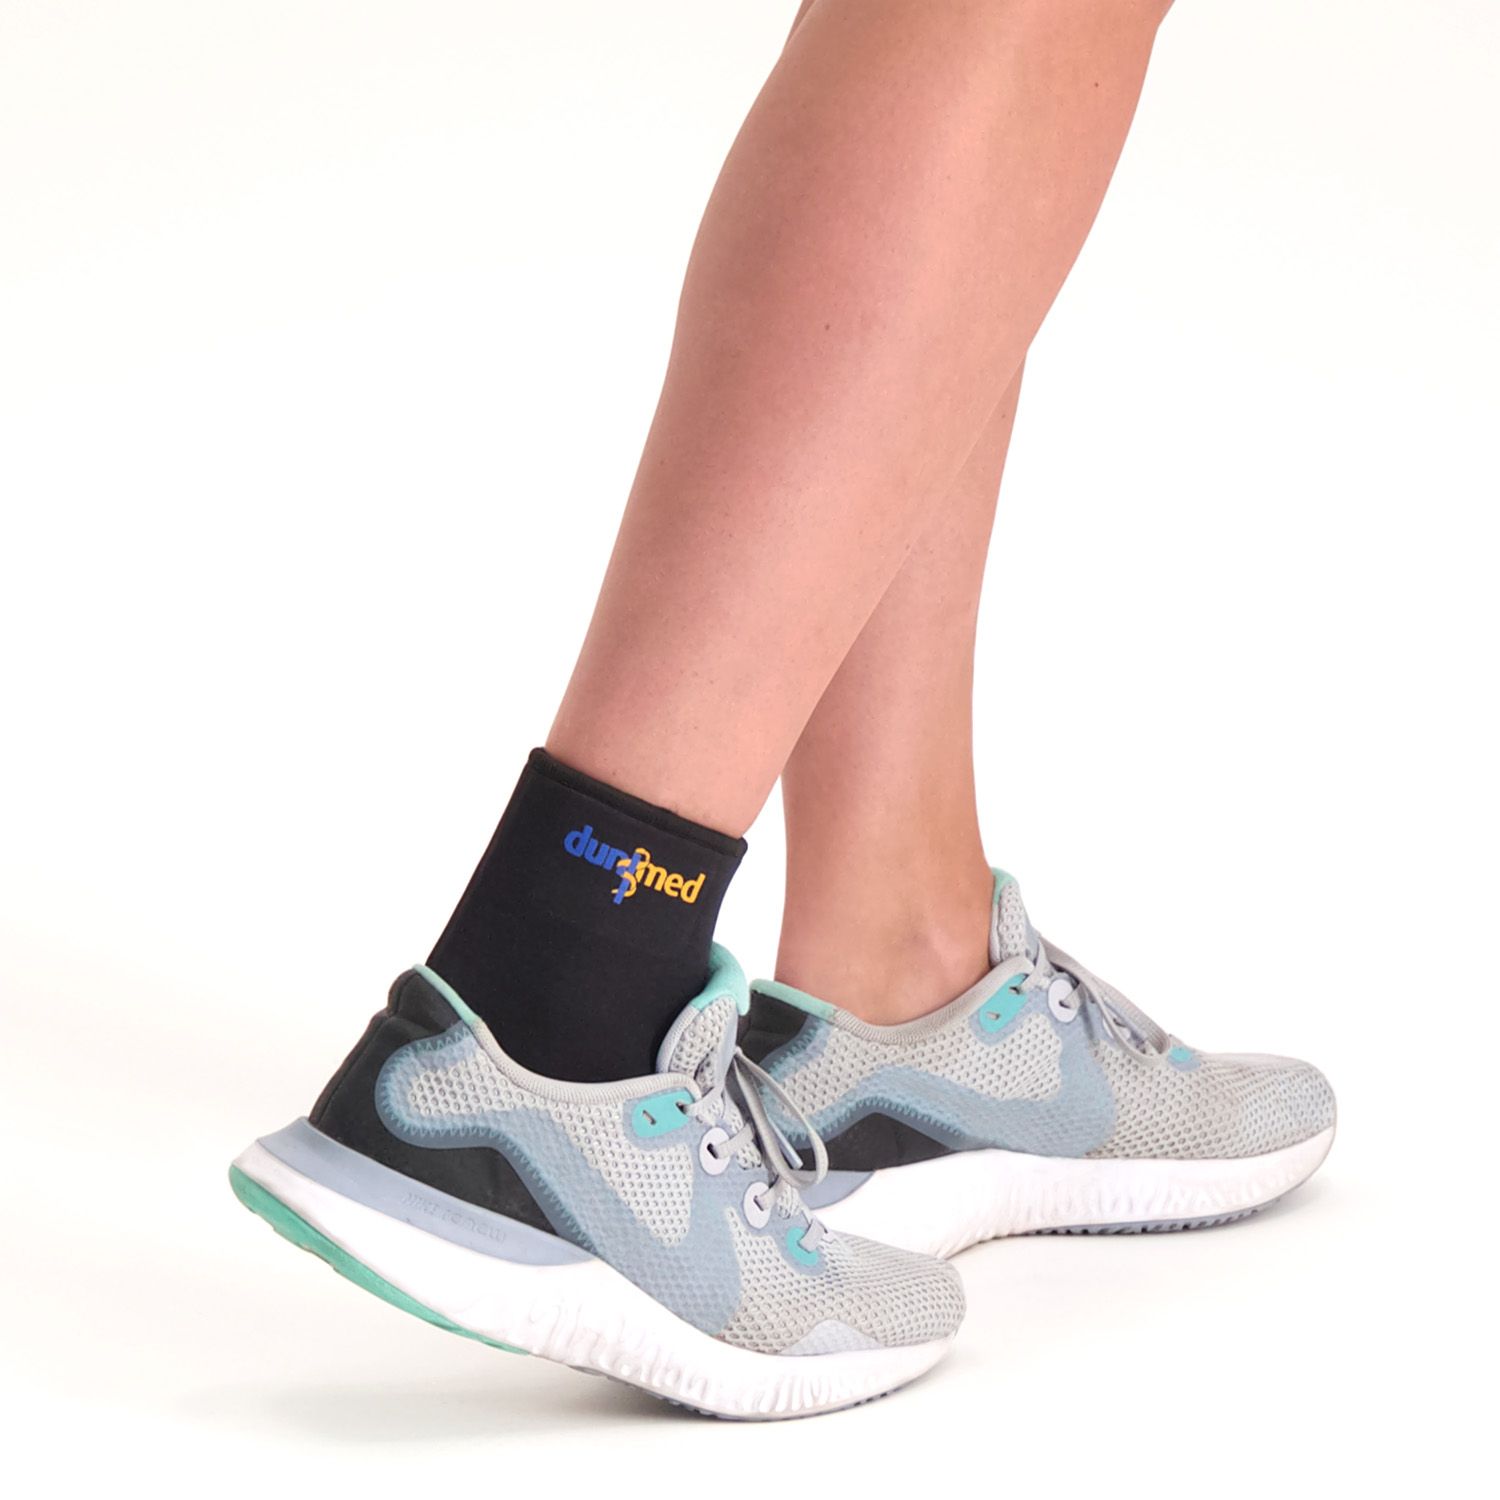 Dunimed ankle support around right foot